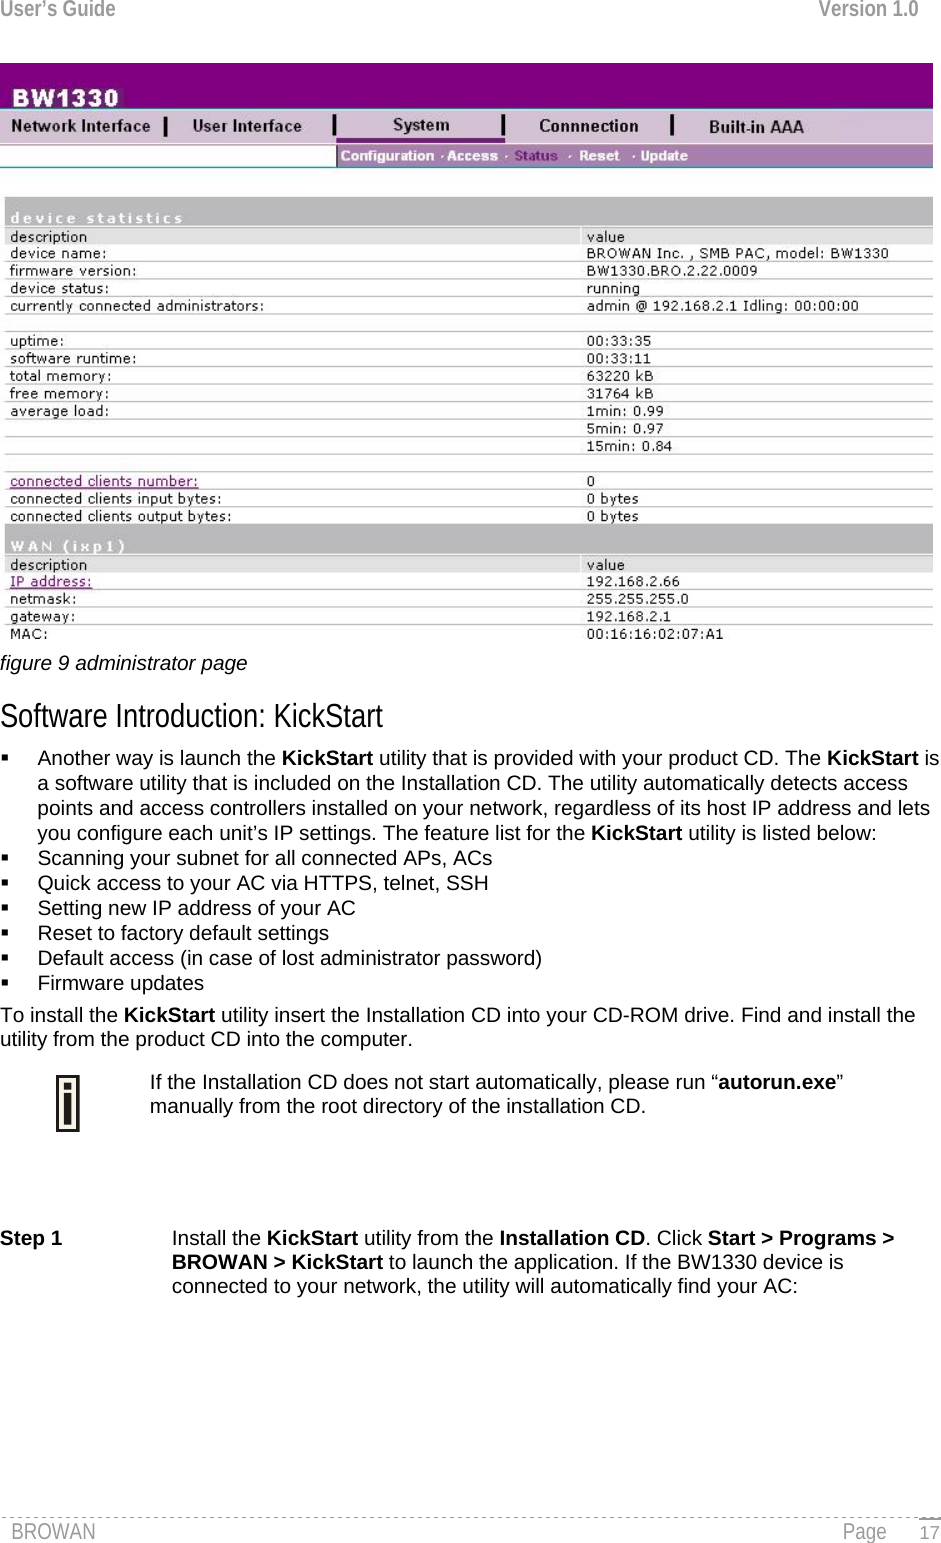 User’s Guide  Version 1.0   figure 9 administrator page Software Introduction: KickStart   Another way is launch the KickStart utility that is provided with your product CD. The KickStart is a software utility that is included on the Installation CD. The utility automatically detects access points and access controllers installed on your network, regardless of its host IP address and lets you configure each unit’s IP settings. The feature list for the KickStart utility is listed below:   Scanning your subnet for all connected APs, ACs   Quick access to your AC via HTTPS, telnet, SSH   Setting new IP address of your AC   Reset to factory default settings   Default access (in case of lost administrator password)  Firmware updates To install the KickStart utility insert the Installation CD into your CD-ROM drive. Find and install the utility from the product CD into the computer. If the Installation CD does not start automatically, please run “autorun.exe” manually from the root directory of the installation CD.    Step 1  Install the KickStart utility from the Installation CD. Click Start &gt; Programs &gt; BROWAN &gt; KickStart to launch the application. If the BW1330 device is connected to your network, the utility will automatically find your AC: BROWAN                                                                                                                                               Page   17